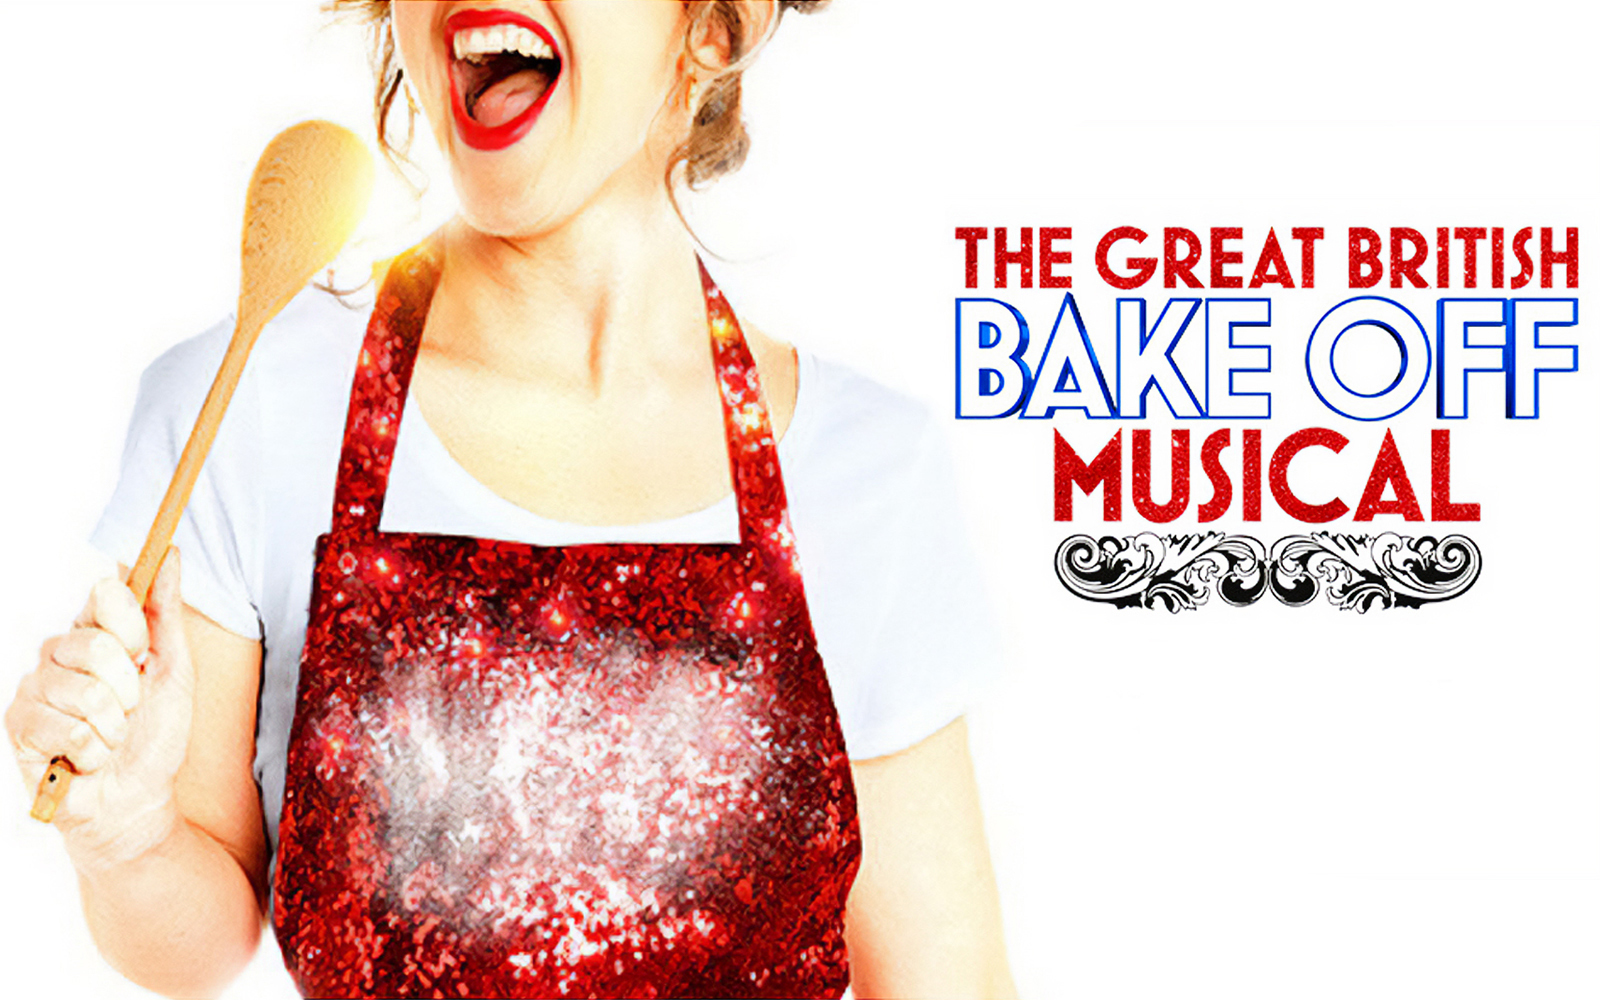 Image of The Great British Bake Off Musical